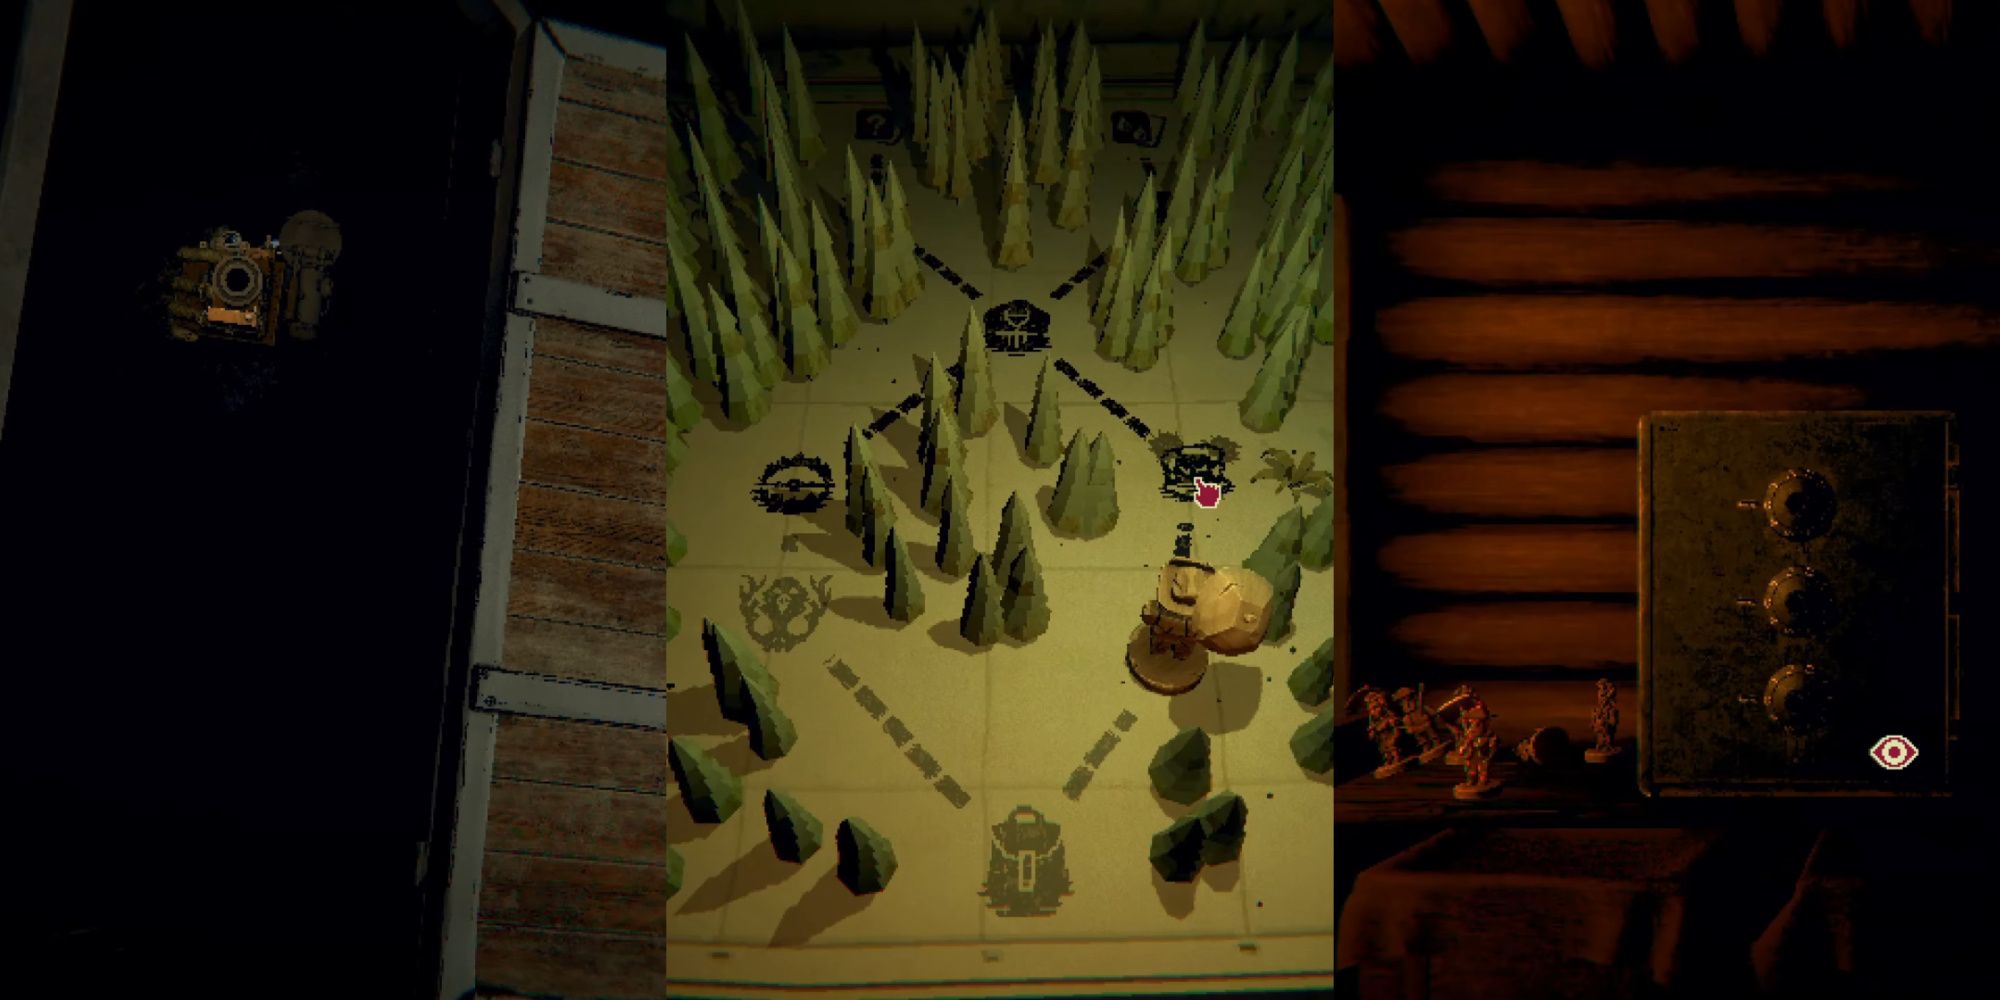 inscryption featured image with the death scene for act 1, the act 1 map, and the safe in leshy's house